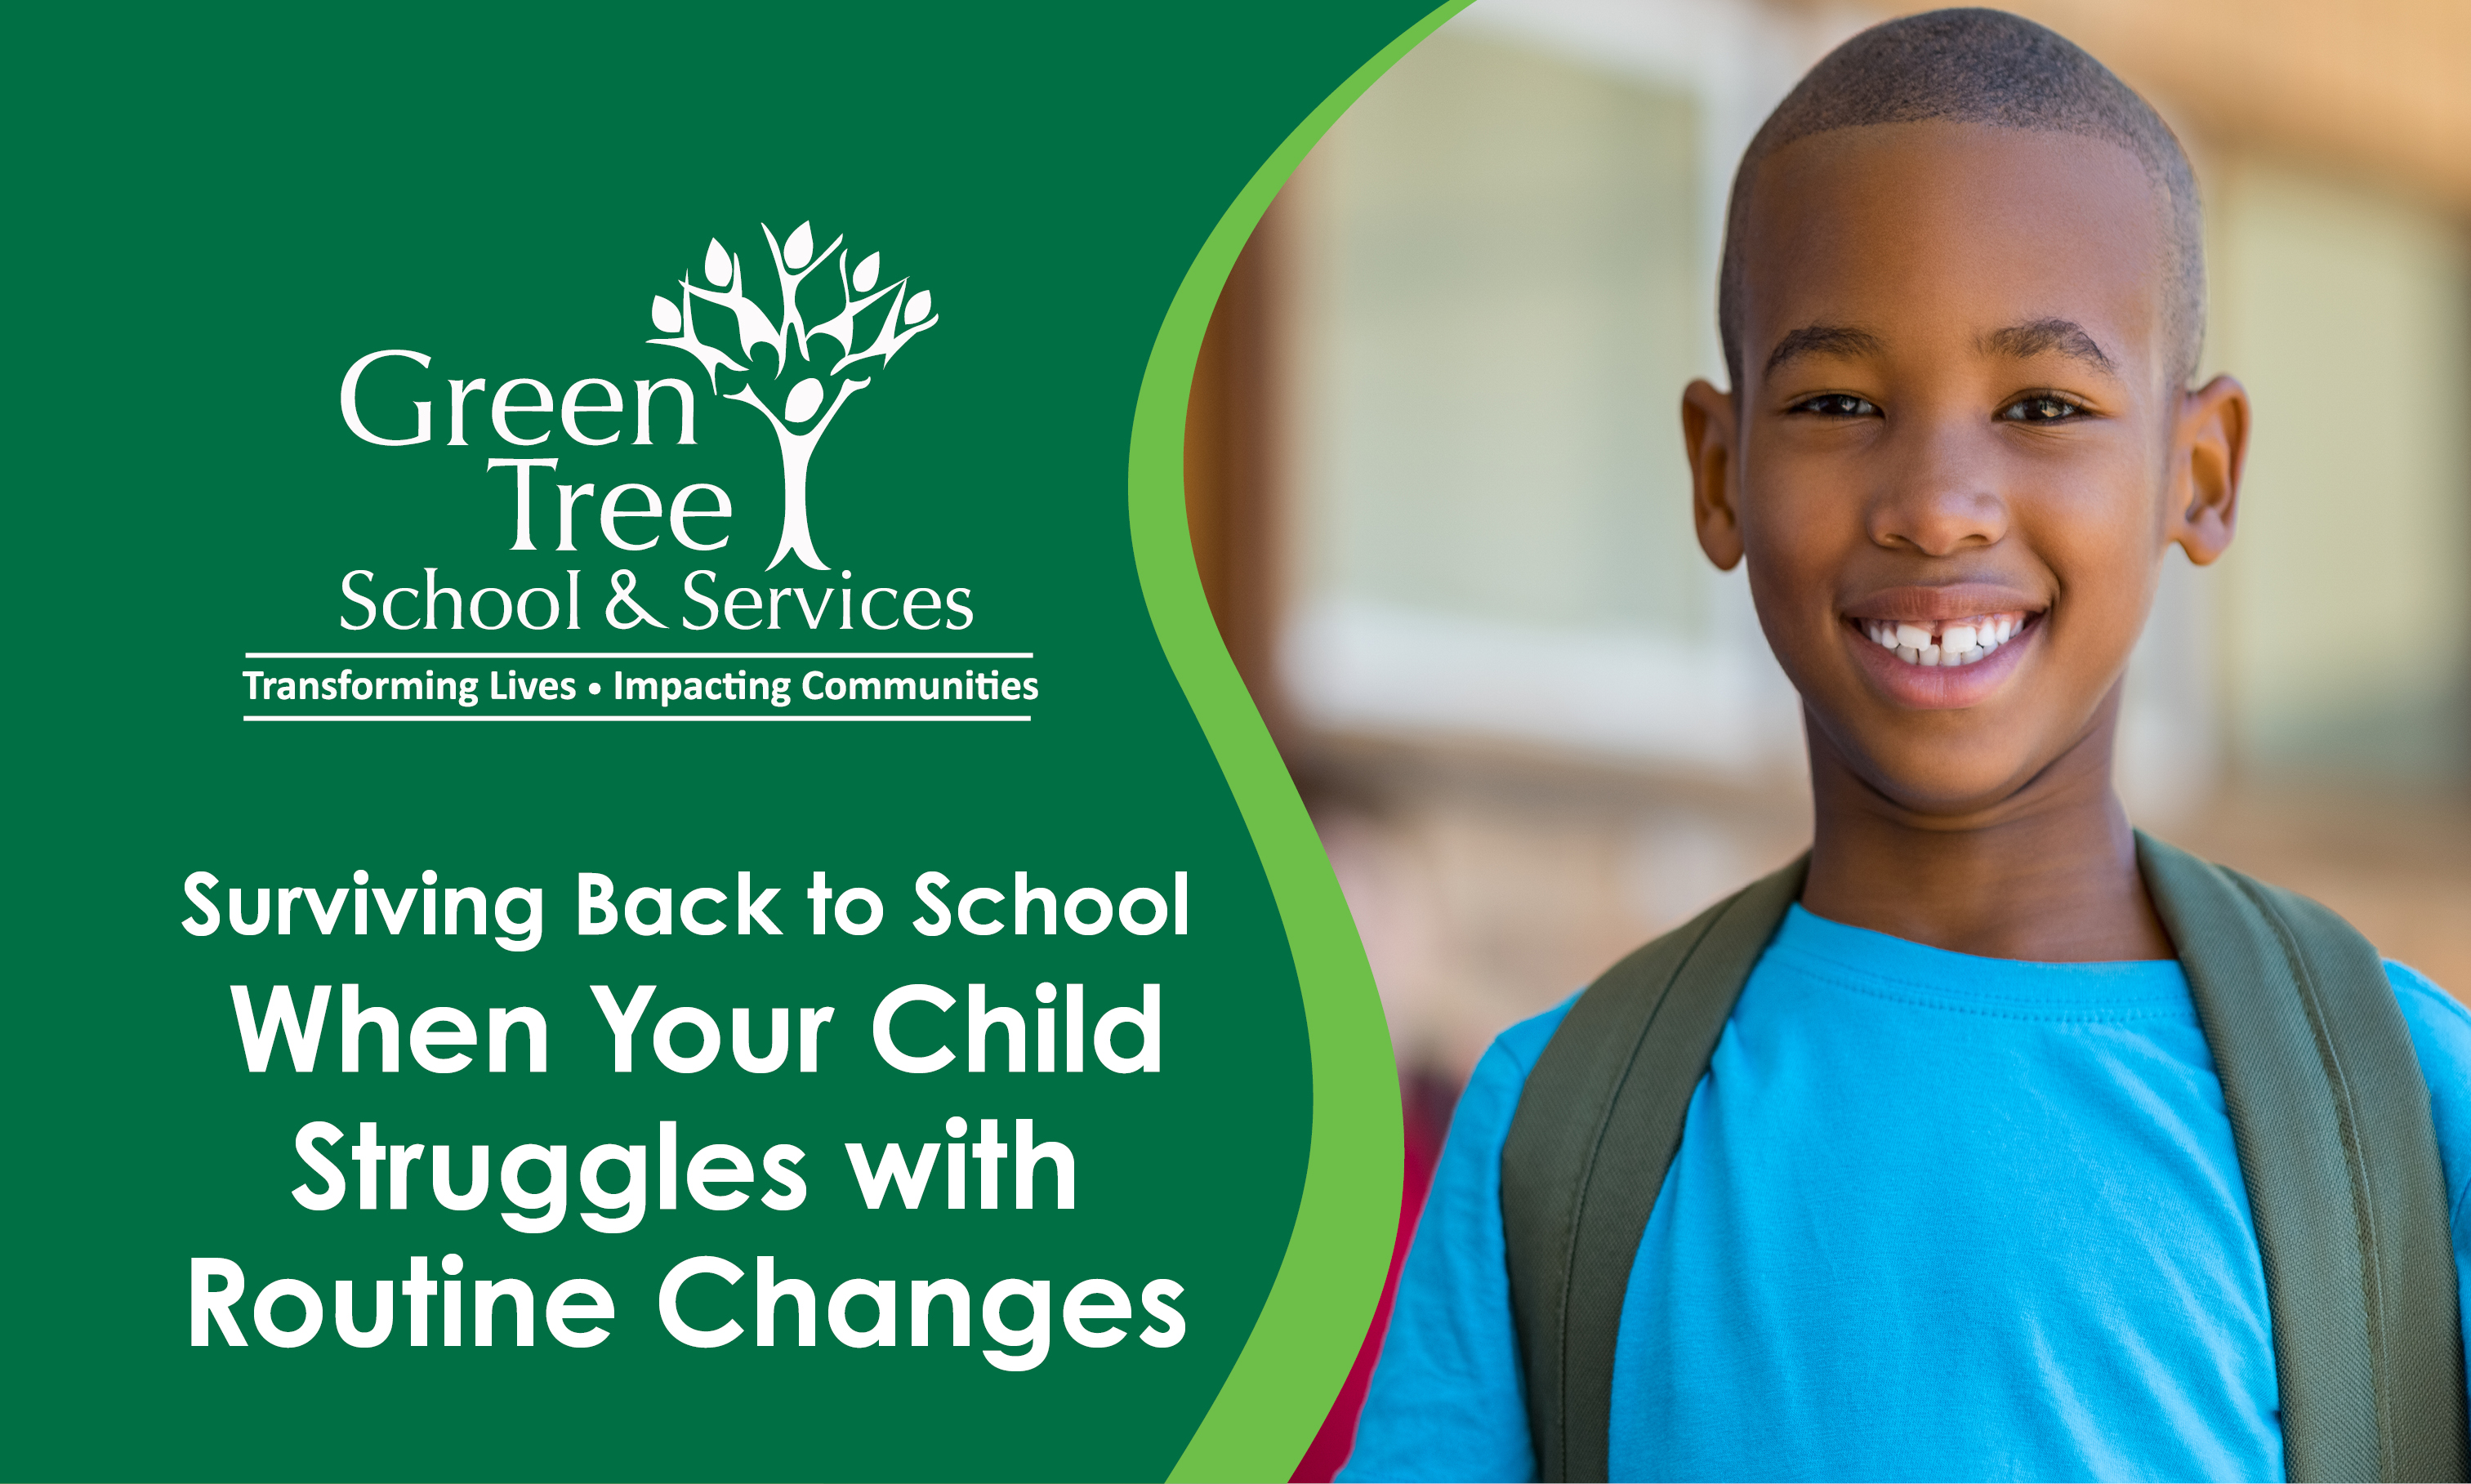 Blog title on left with Green Tree logo, boy with backpack smiling on right